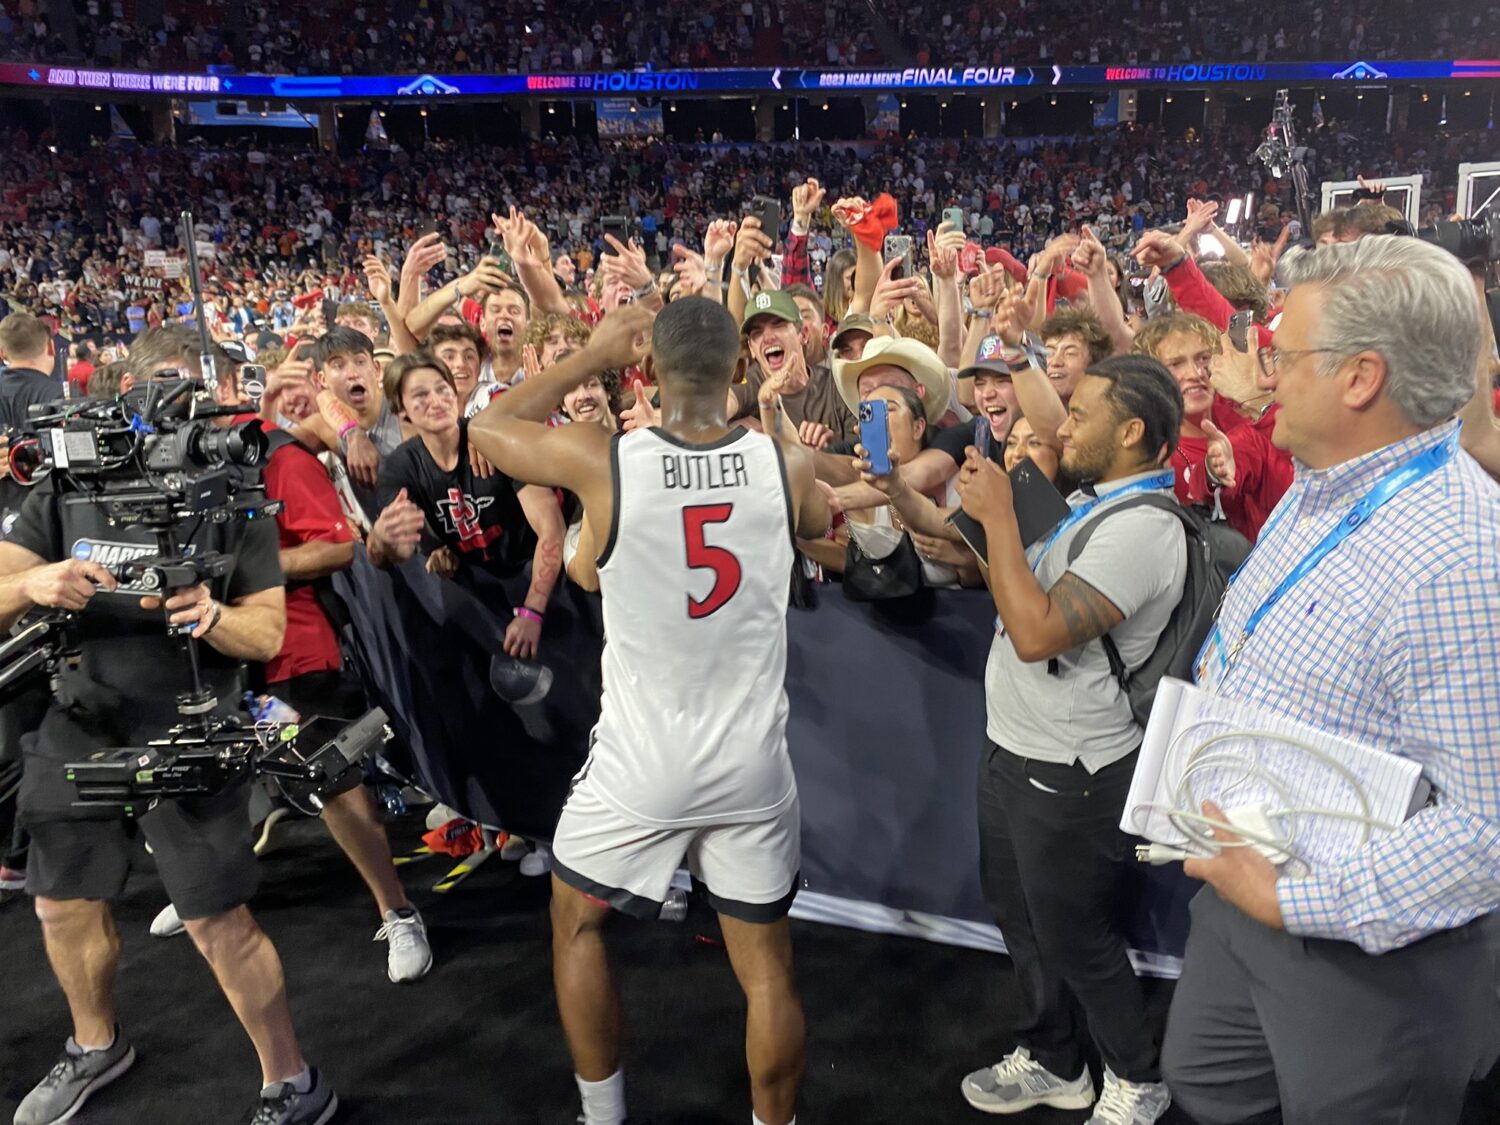 2023 Men’s Final Four: San Diego State wins on buzzer beater, faces UConn in title game | Houston Public Media